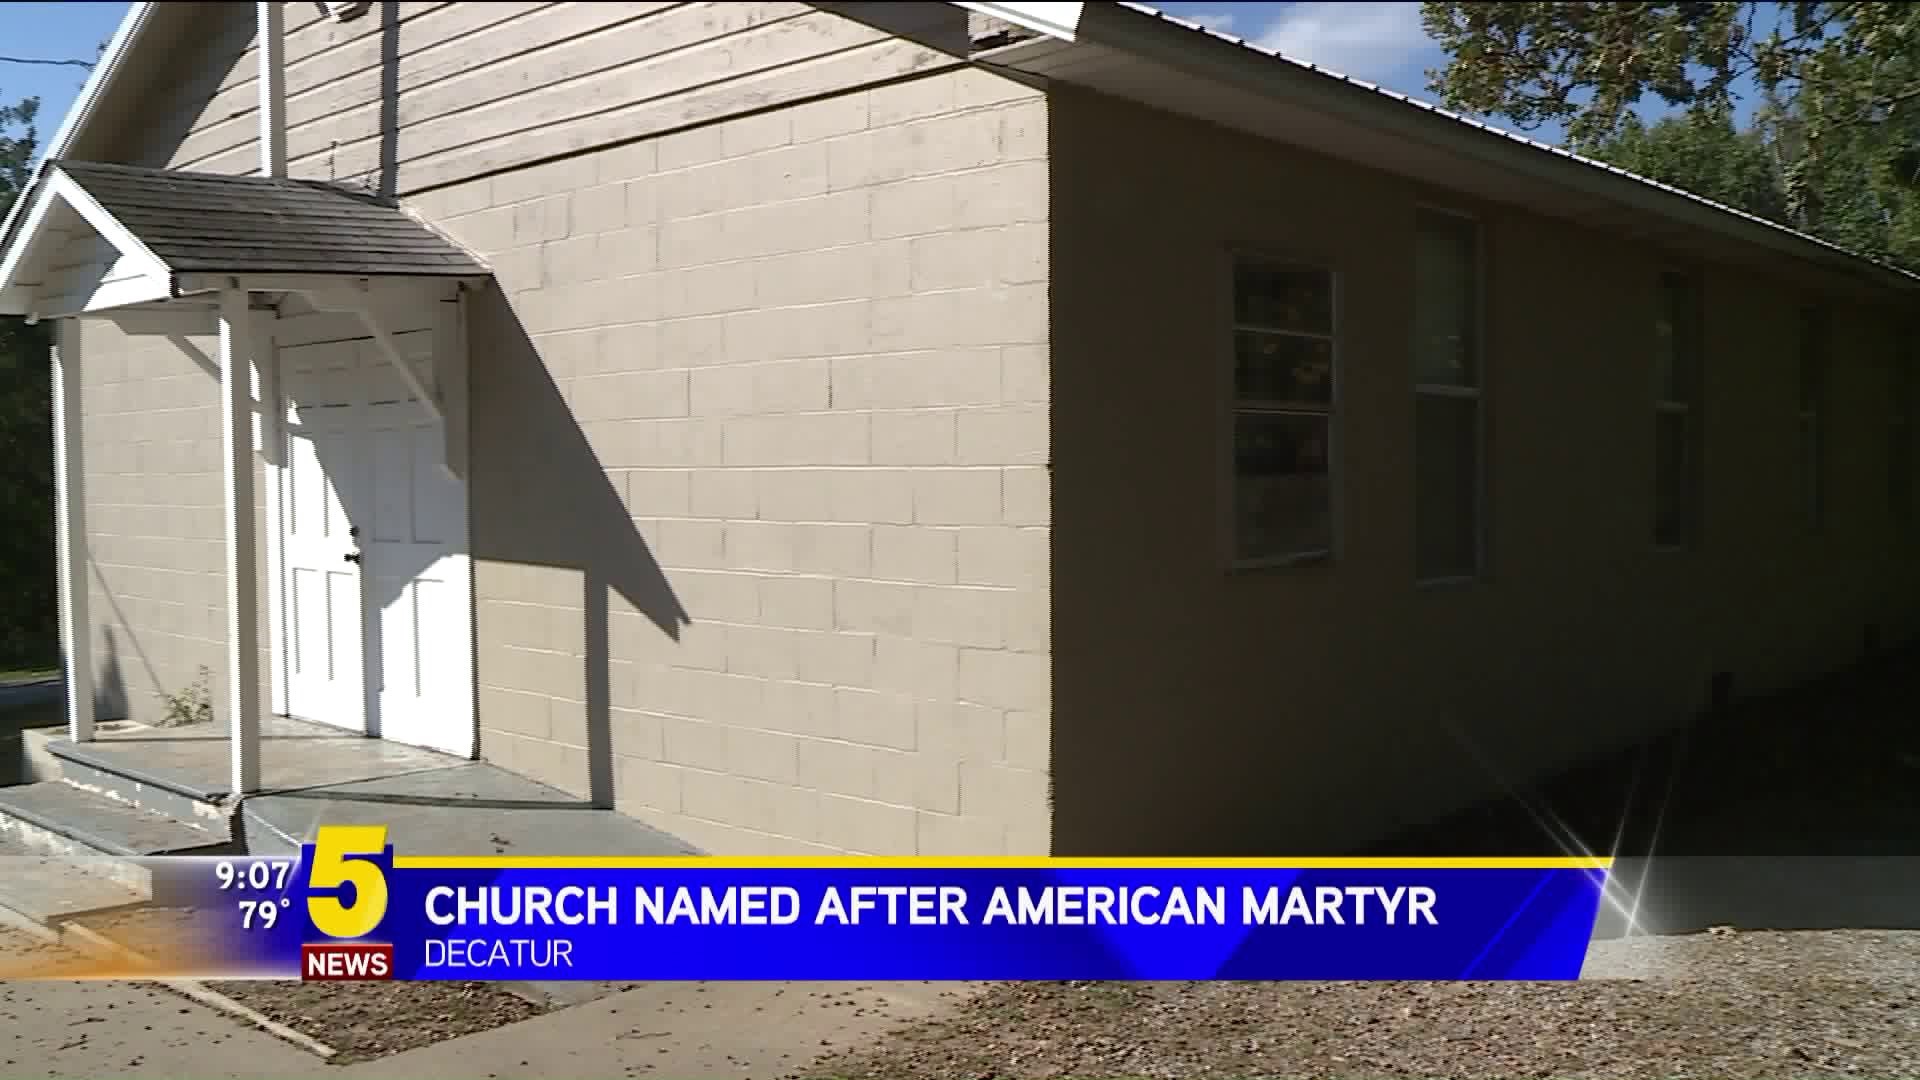 Church Named After American Martyr